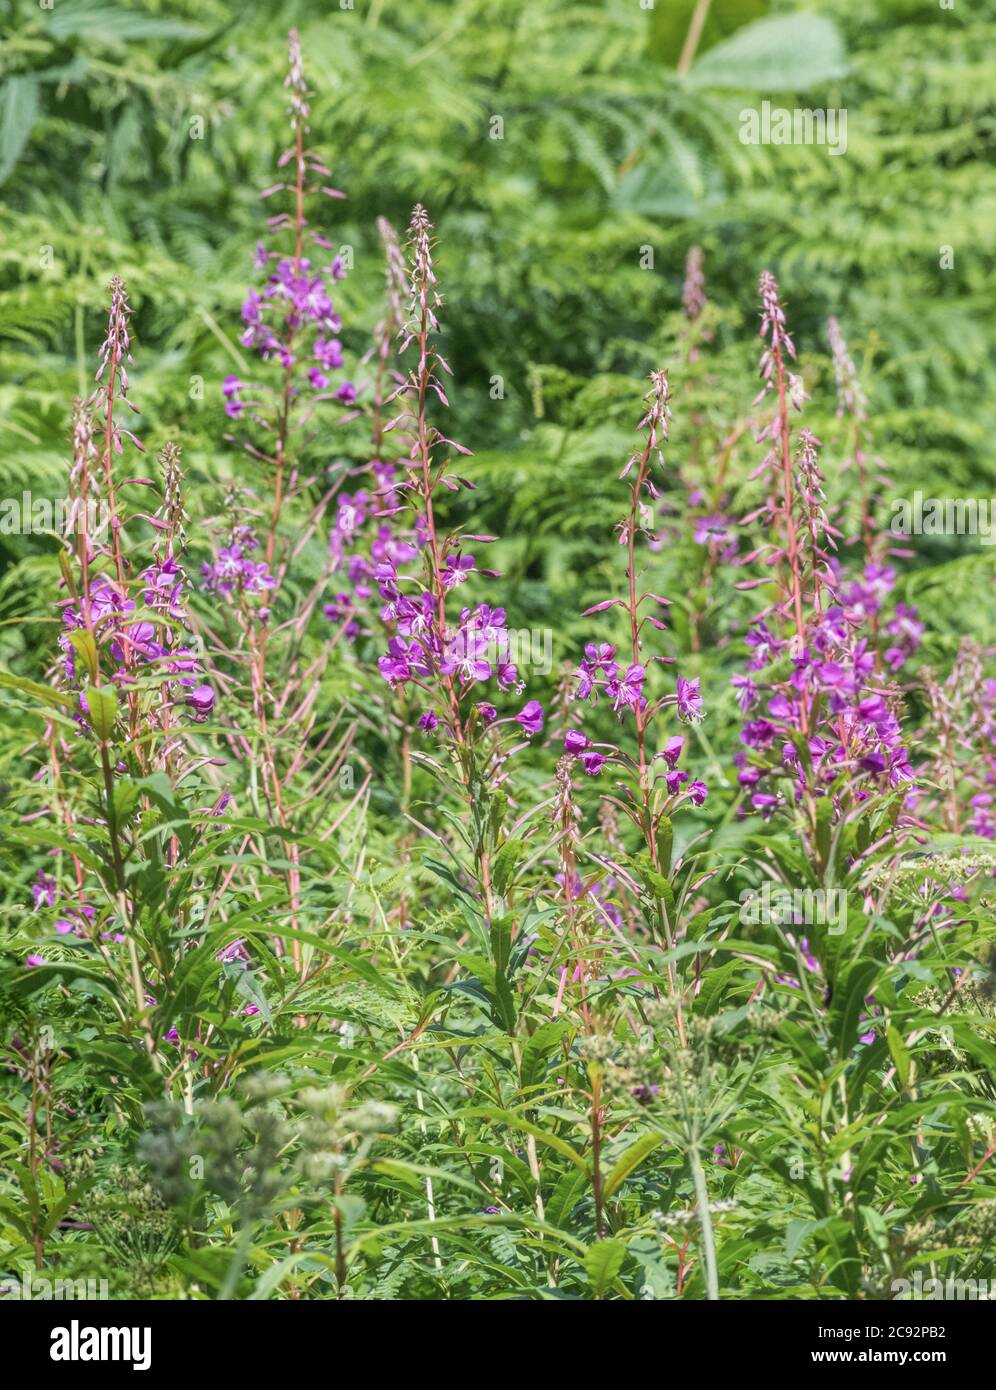 Close shot Rosebay Willowherb / Epilobium angustifolium flowers in rural hedgerow. Young leaves may be eaten cooked & was used as medicinal plant. Stock Photo